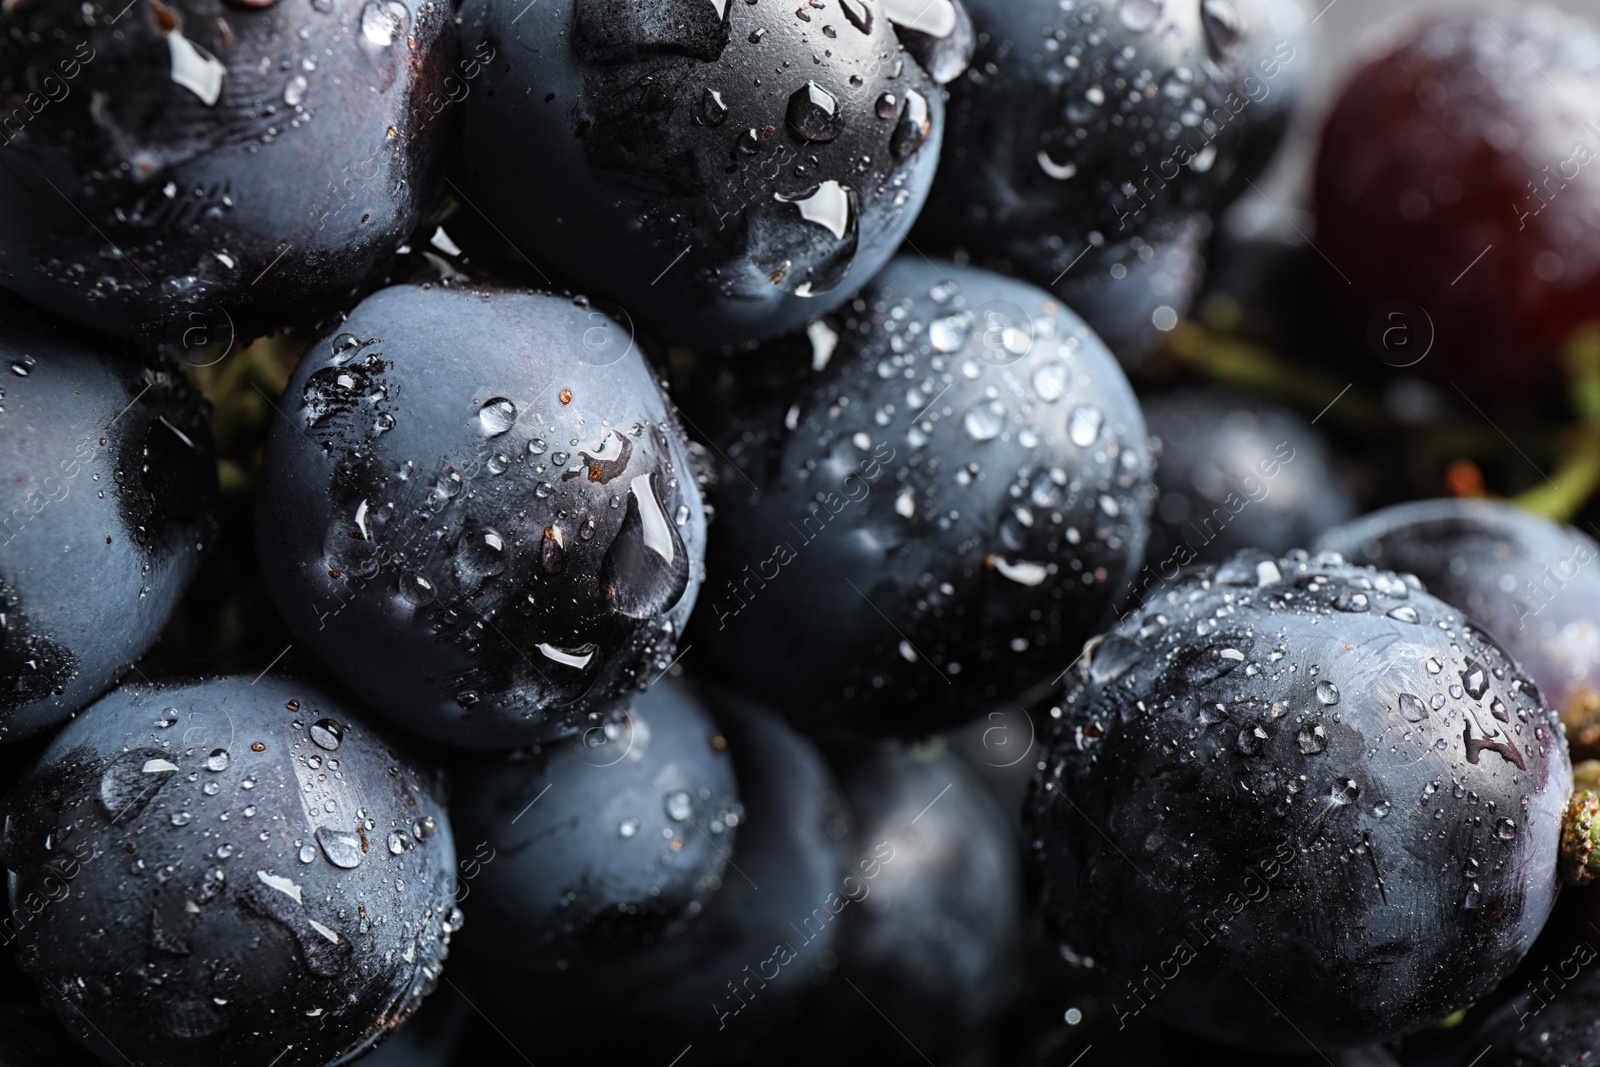 Photo of Fresh ripe juicy black grapes as background, closeup view